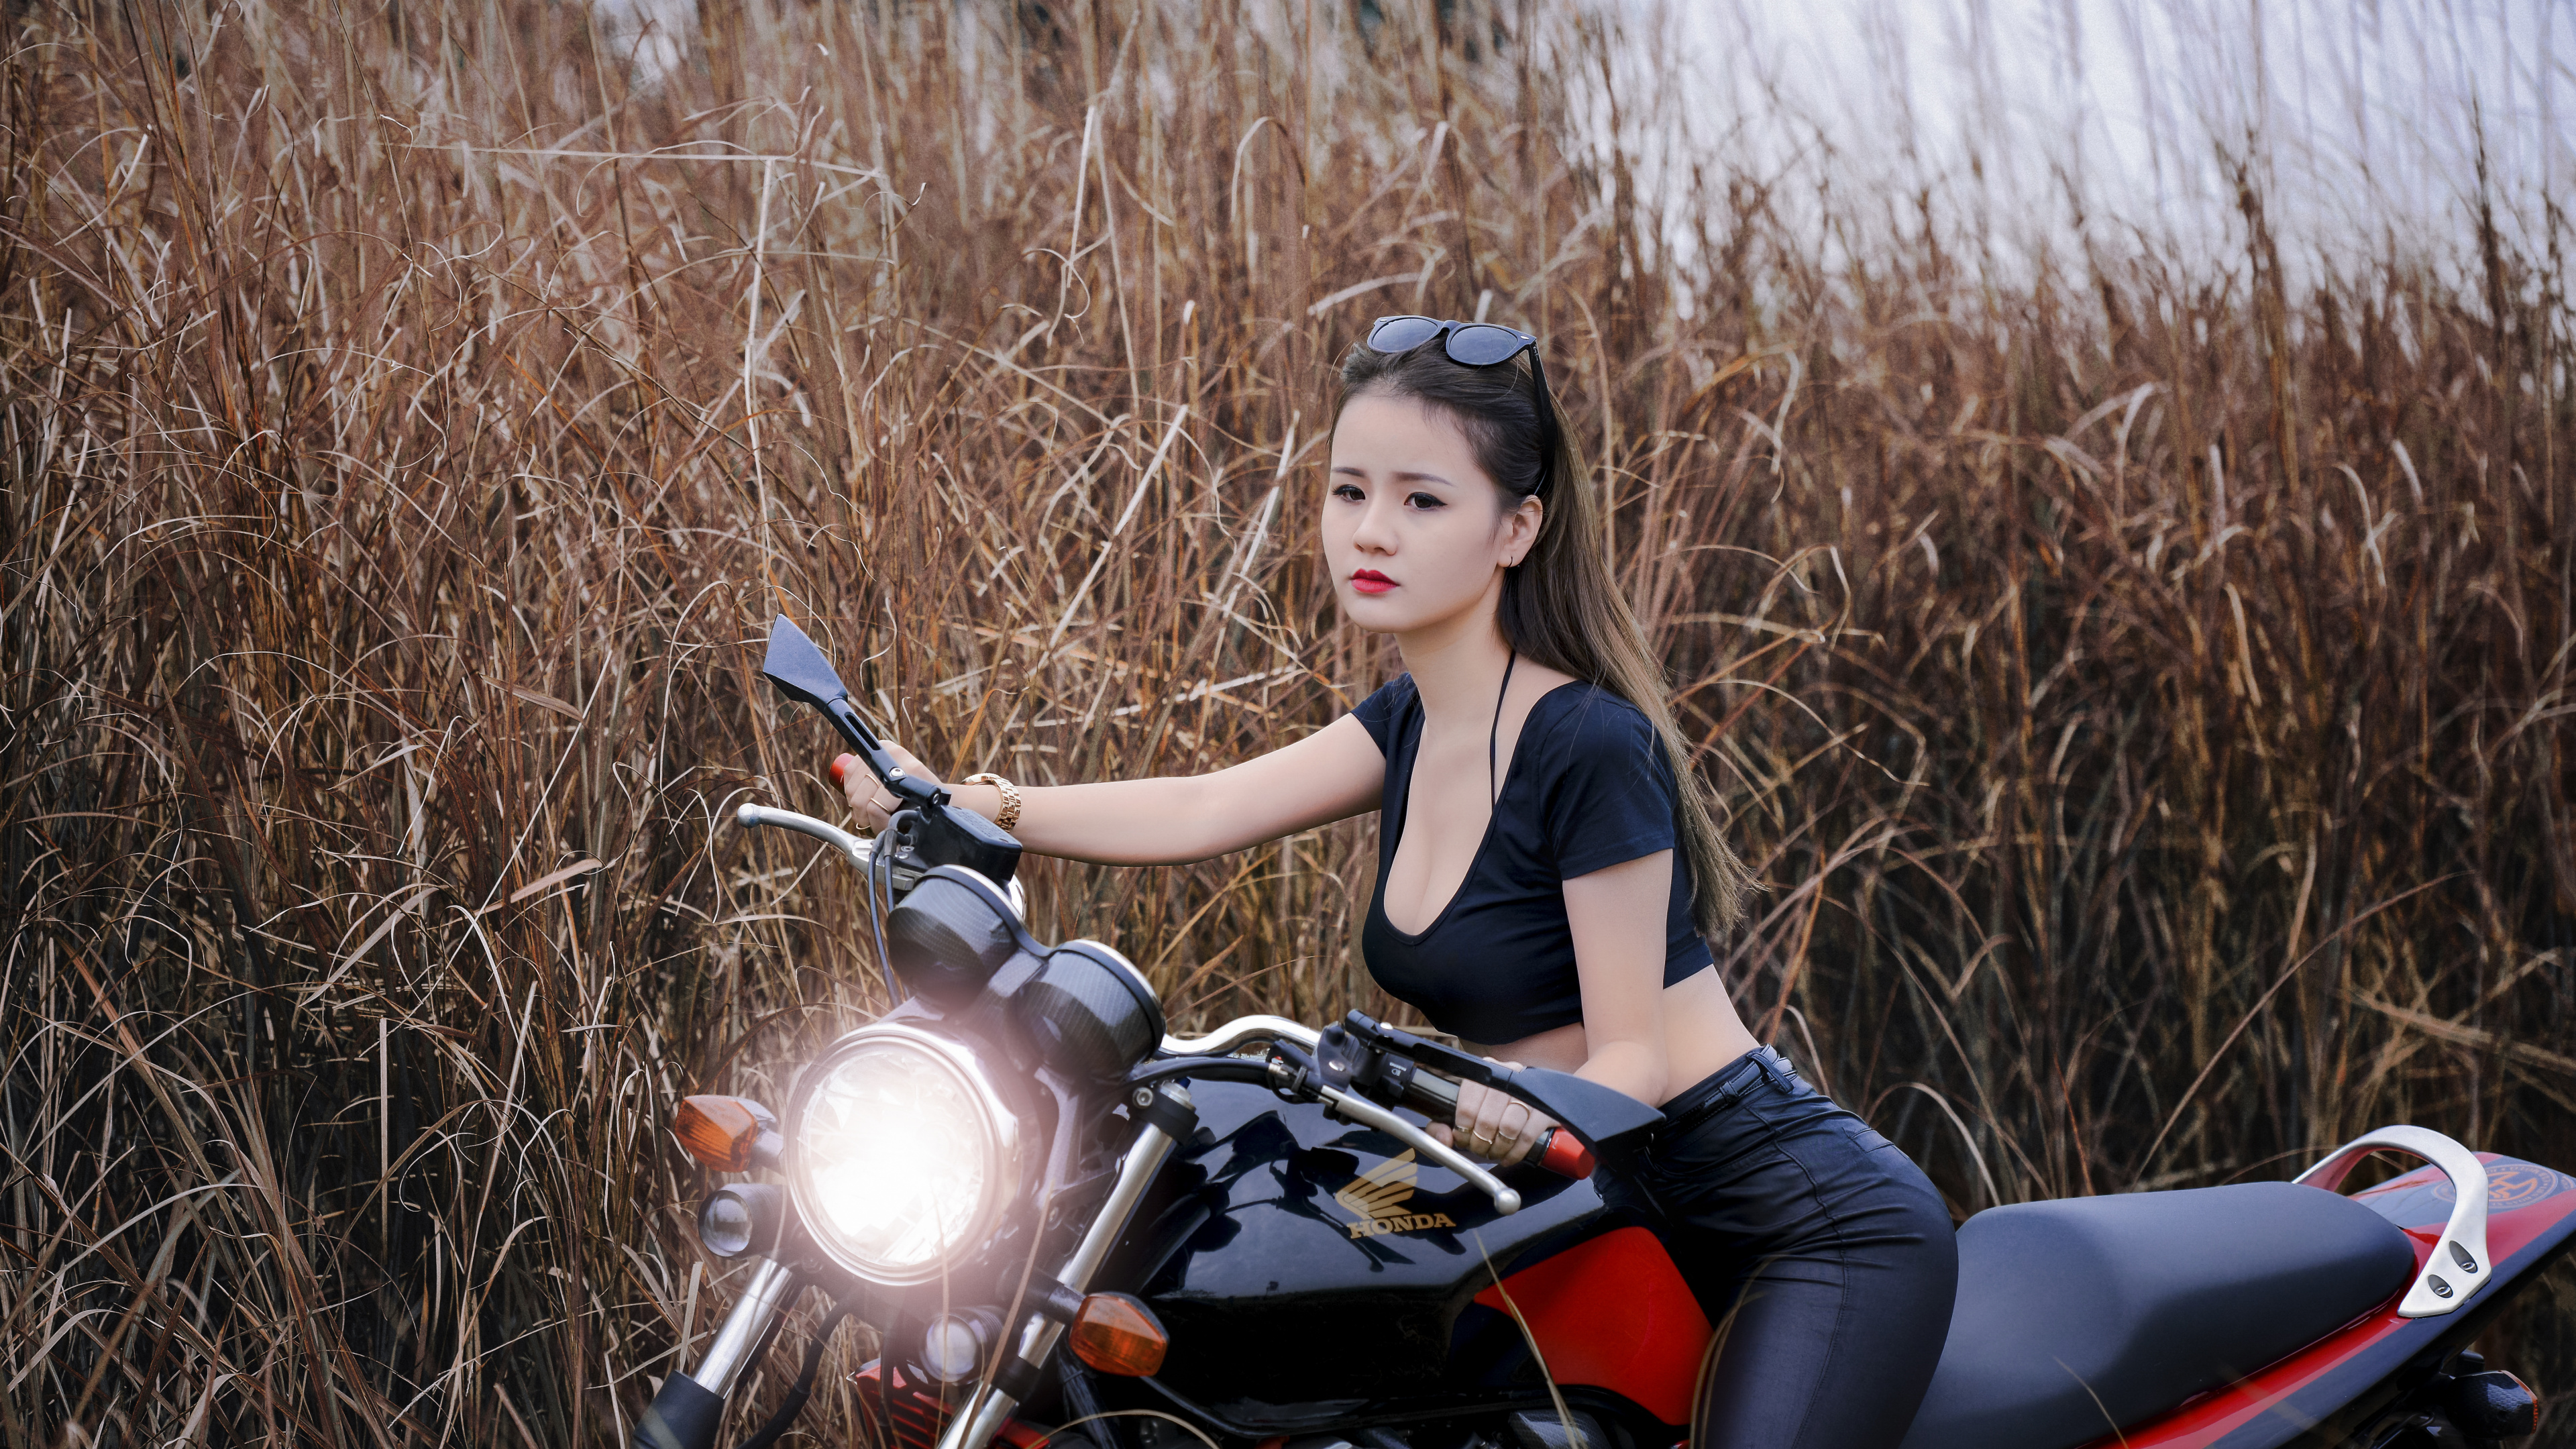 Woman in Black Tank Top and Black Leggings Sitting on Red and Black Motorcycle. Wallpaper in 3840x2160 Resolution